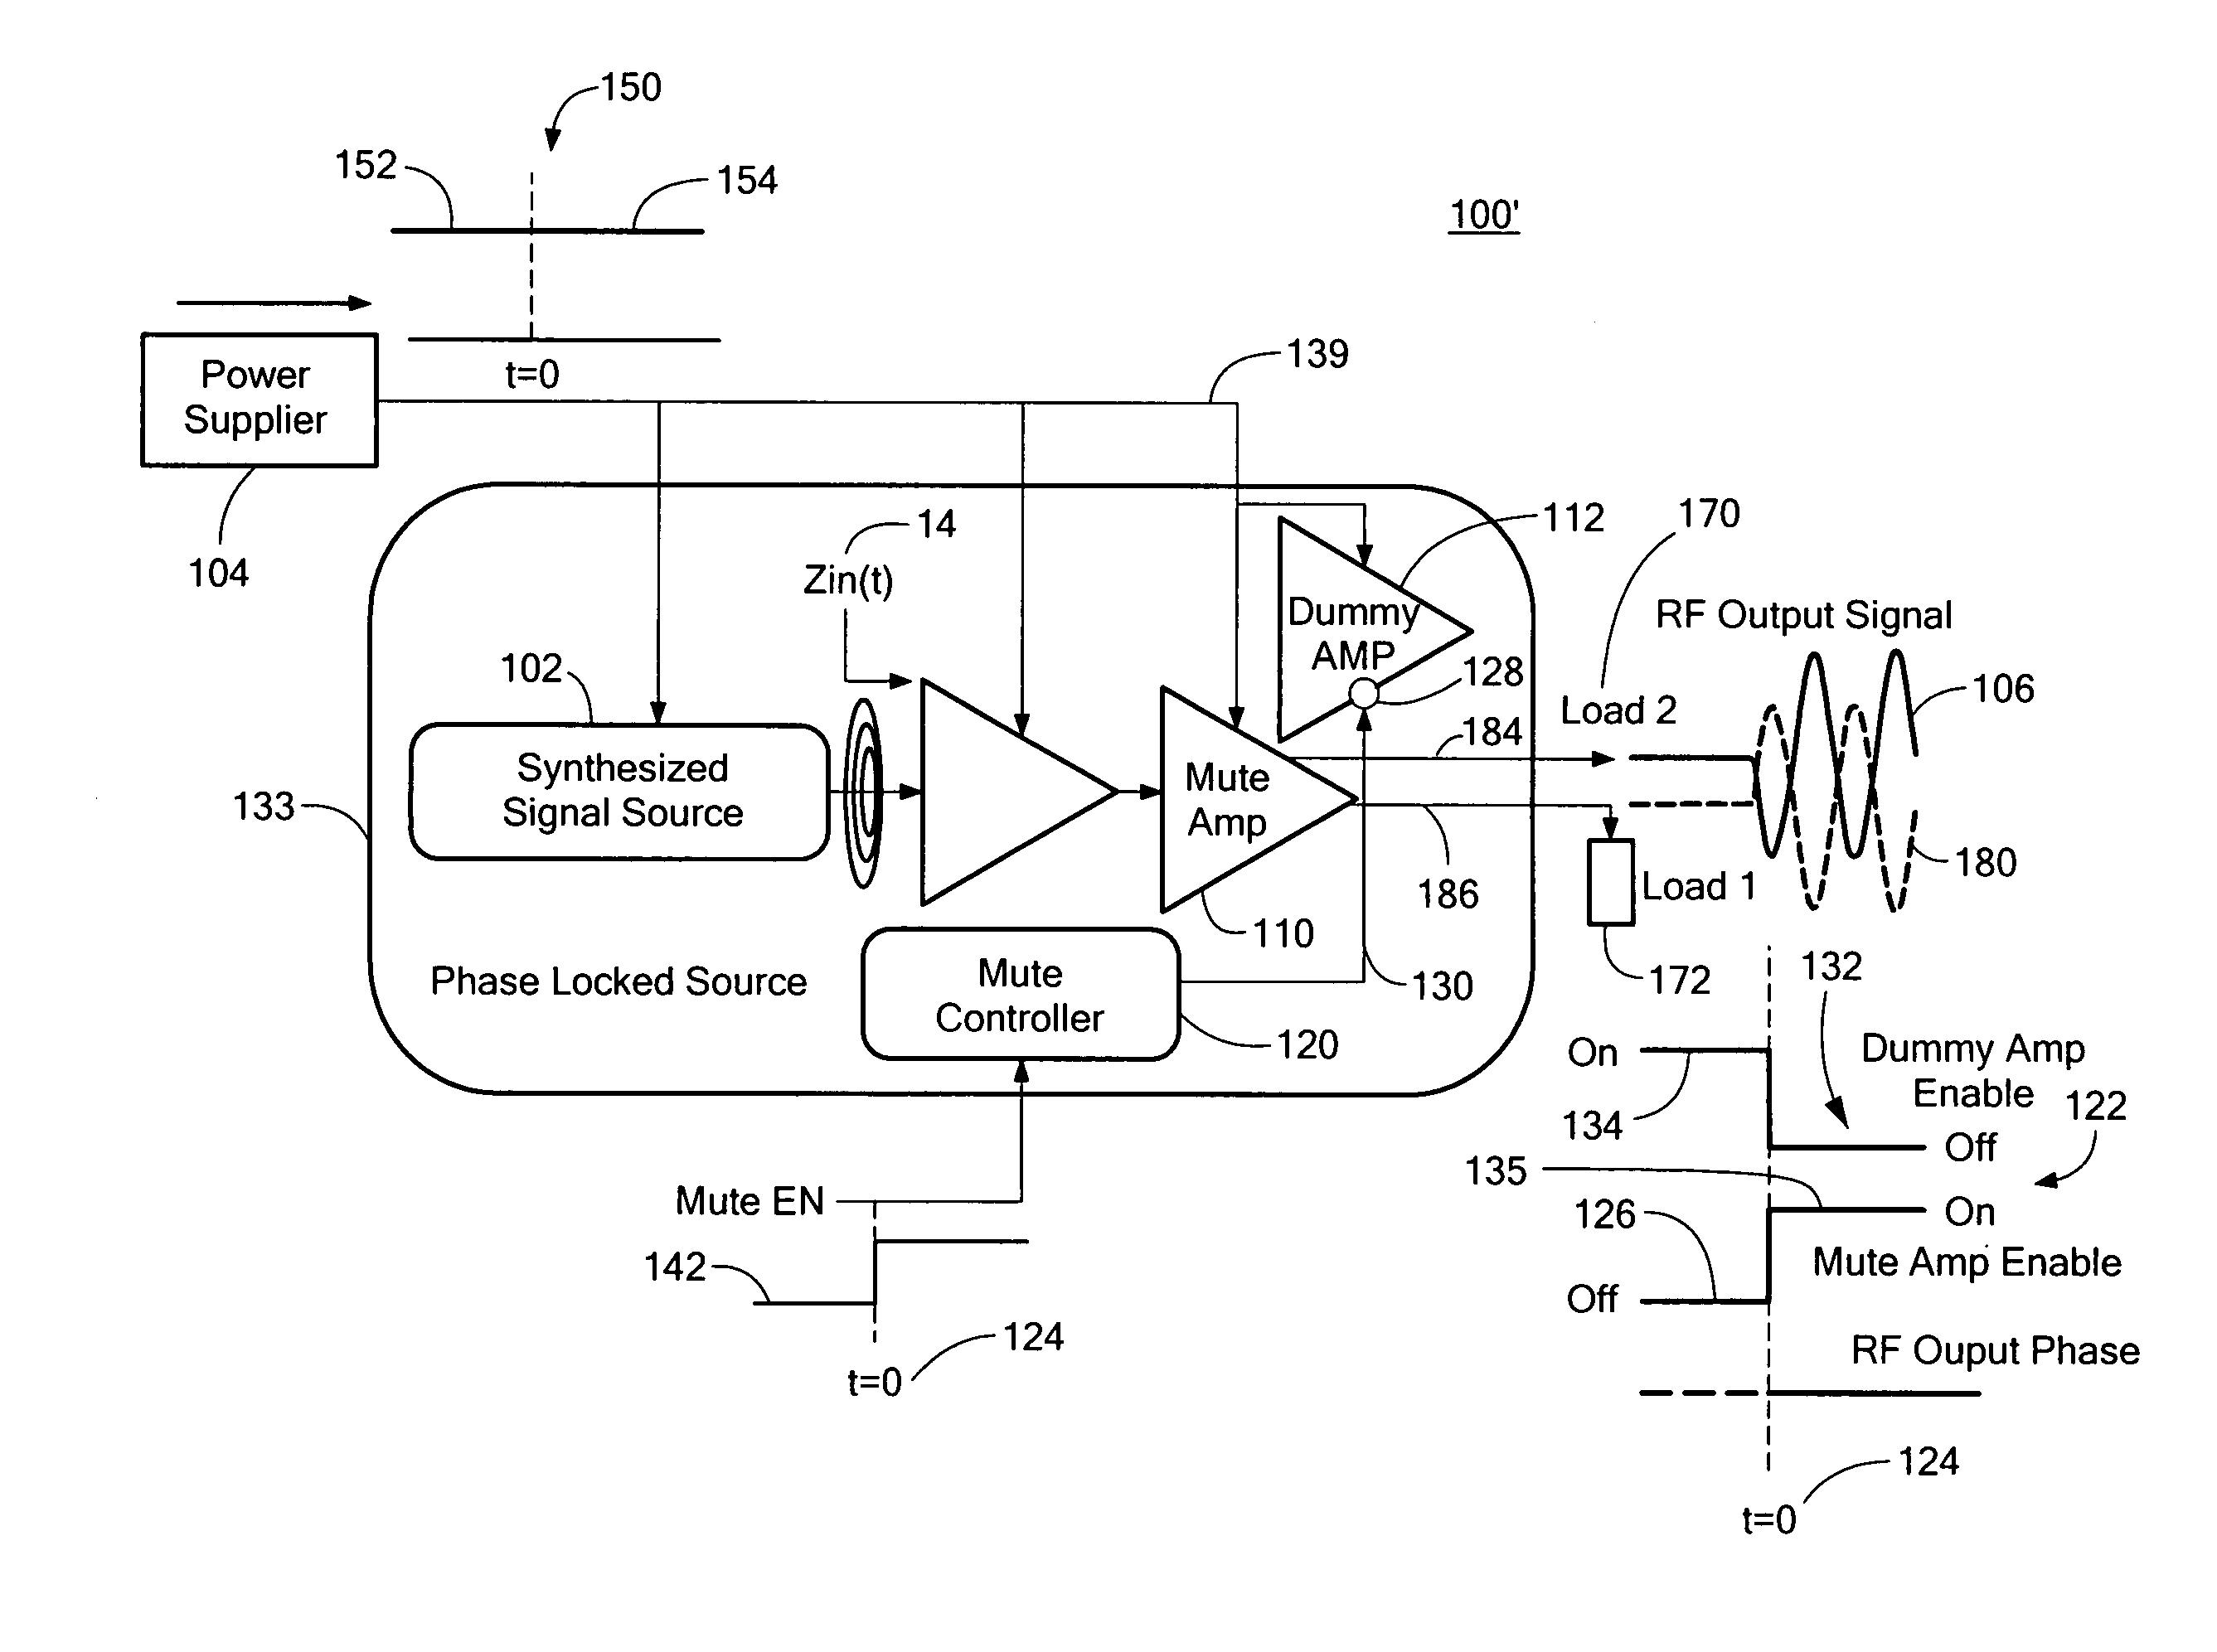 Fast Turn On System For A Synthesized Source Signal